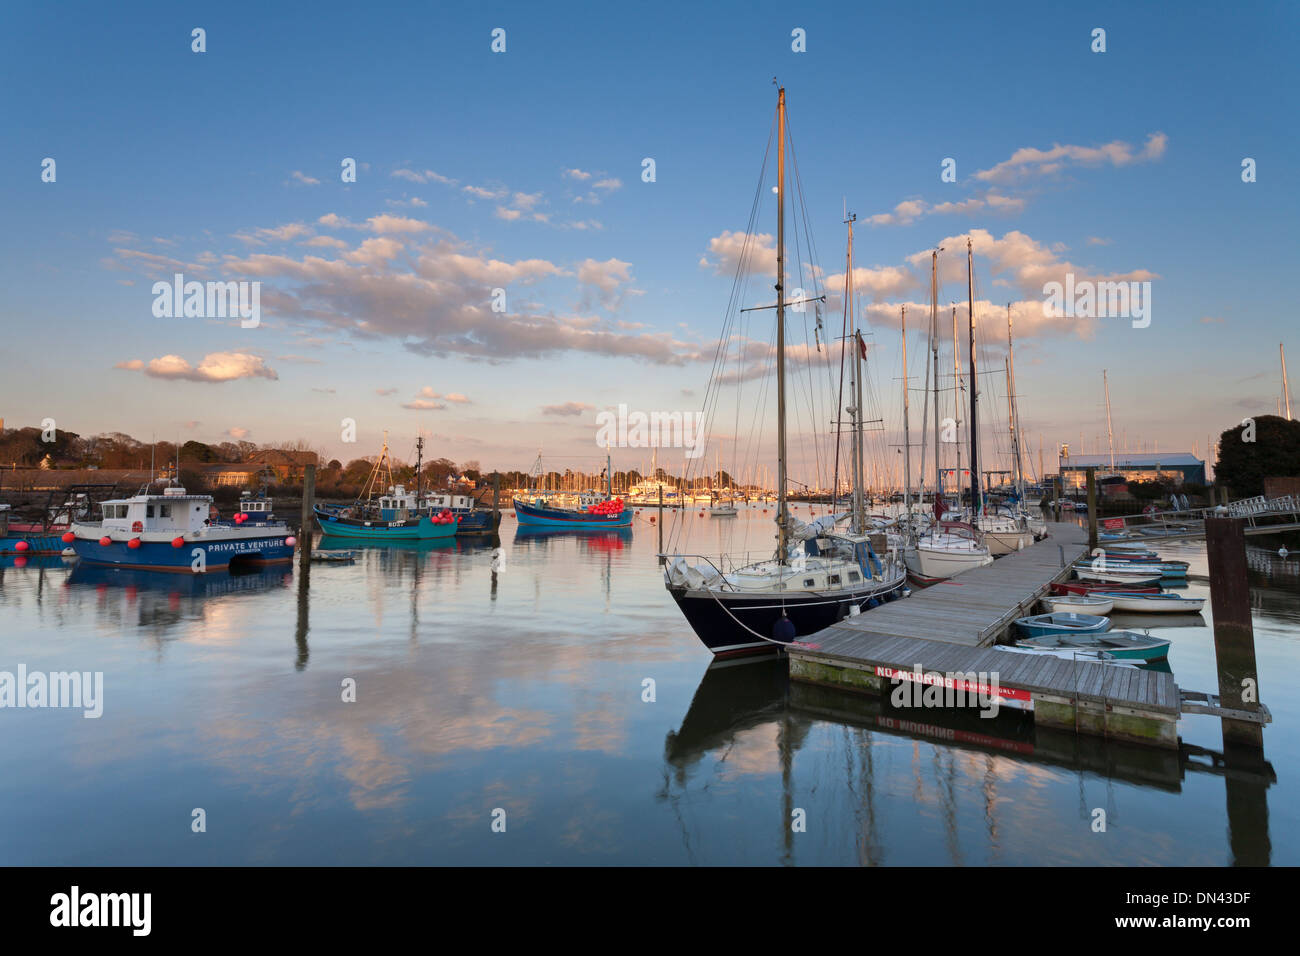 Boats in Lymington Harbour, New Forest, Hampshire, England. Stock Photo